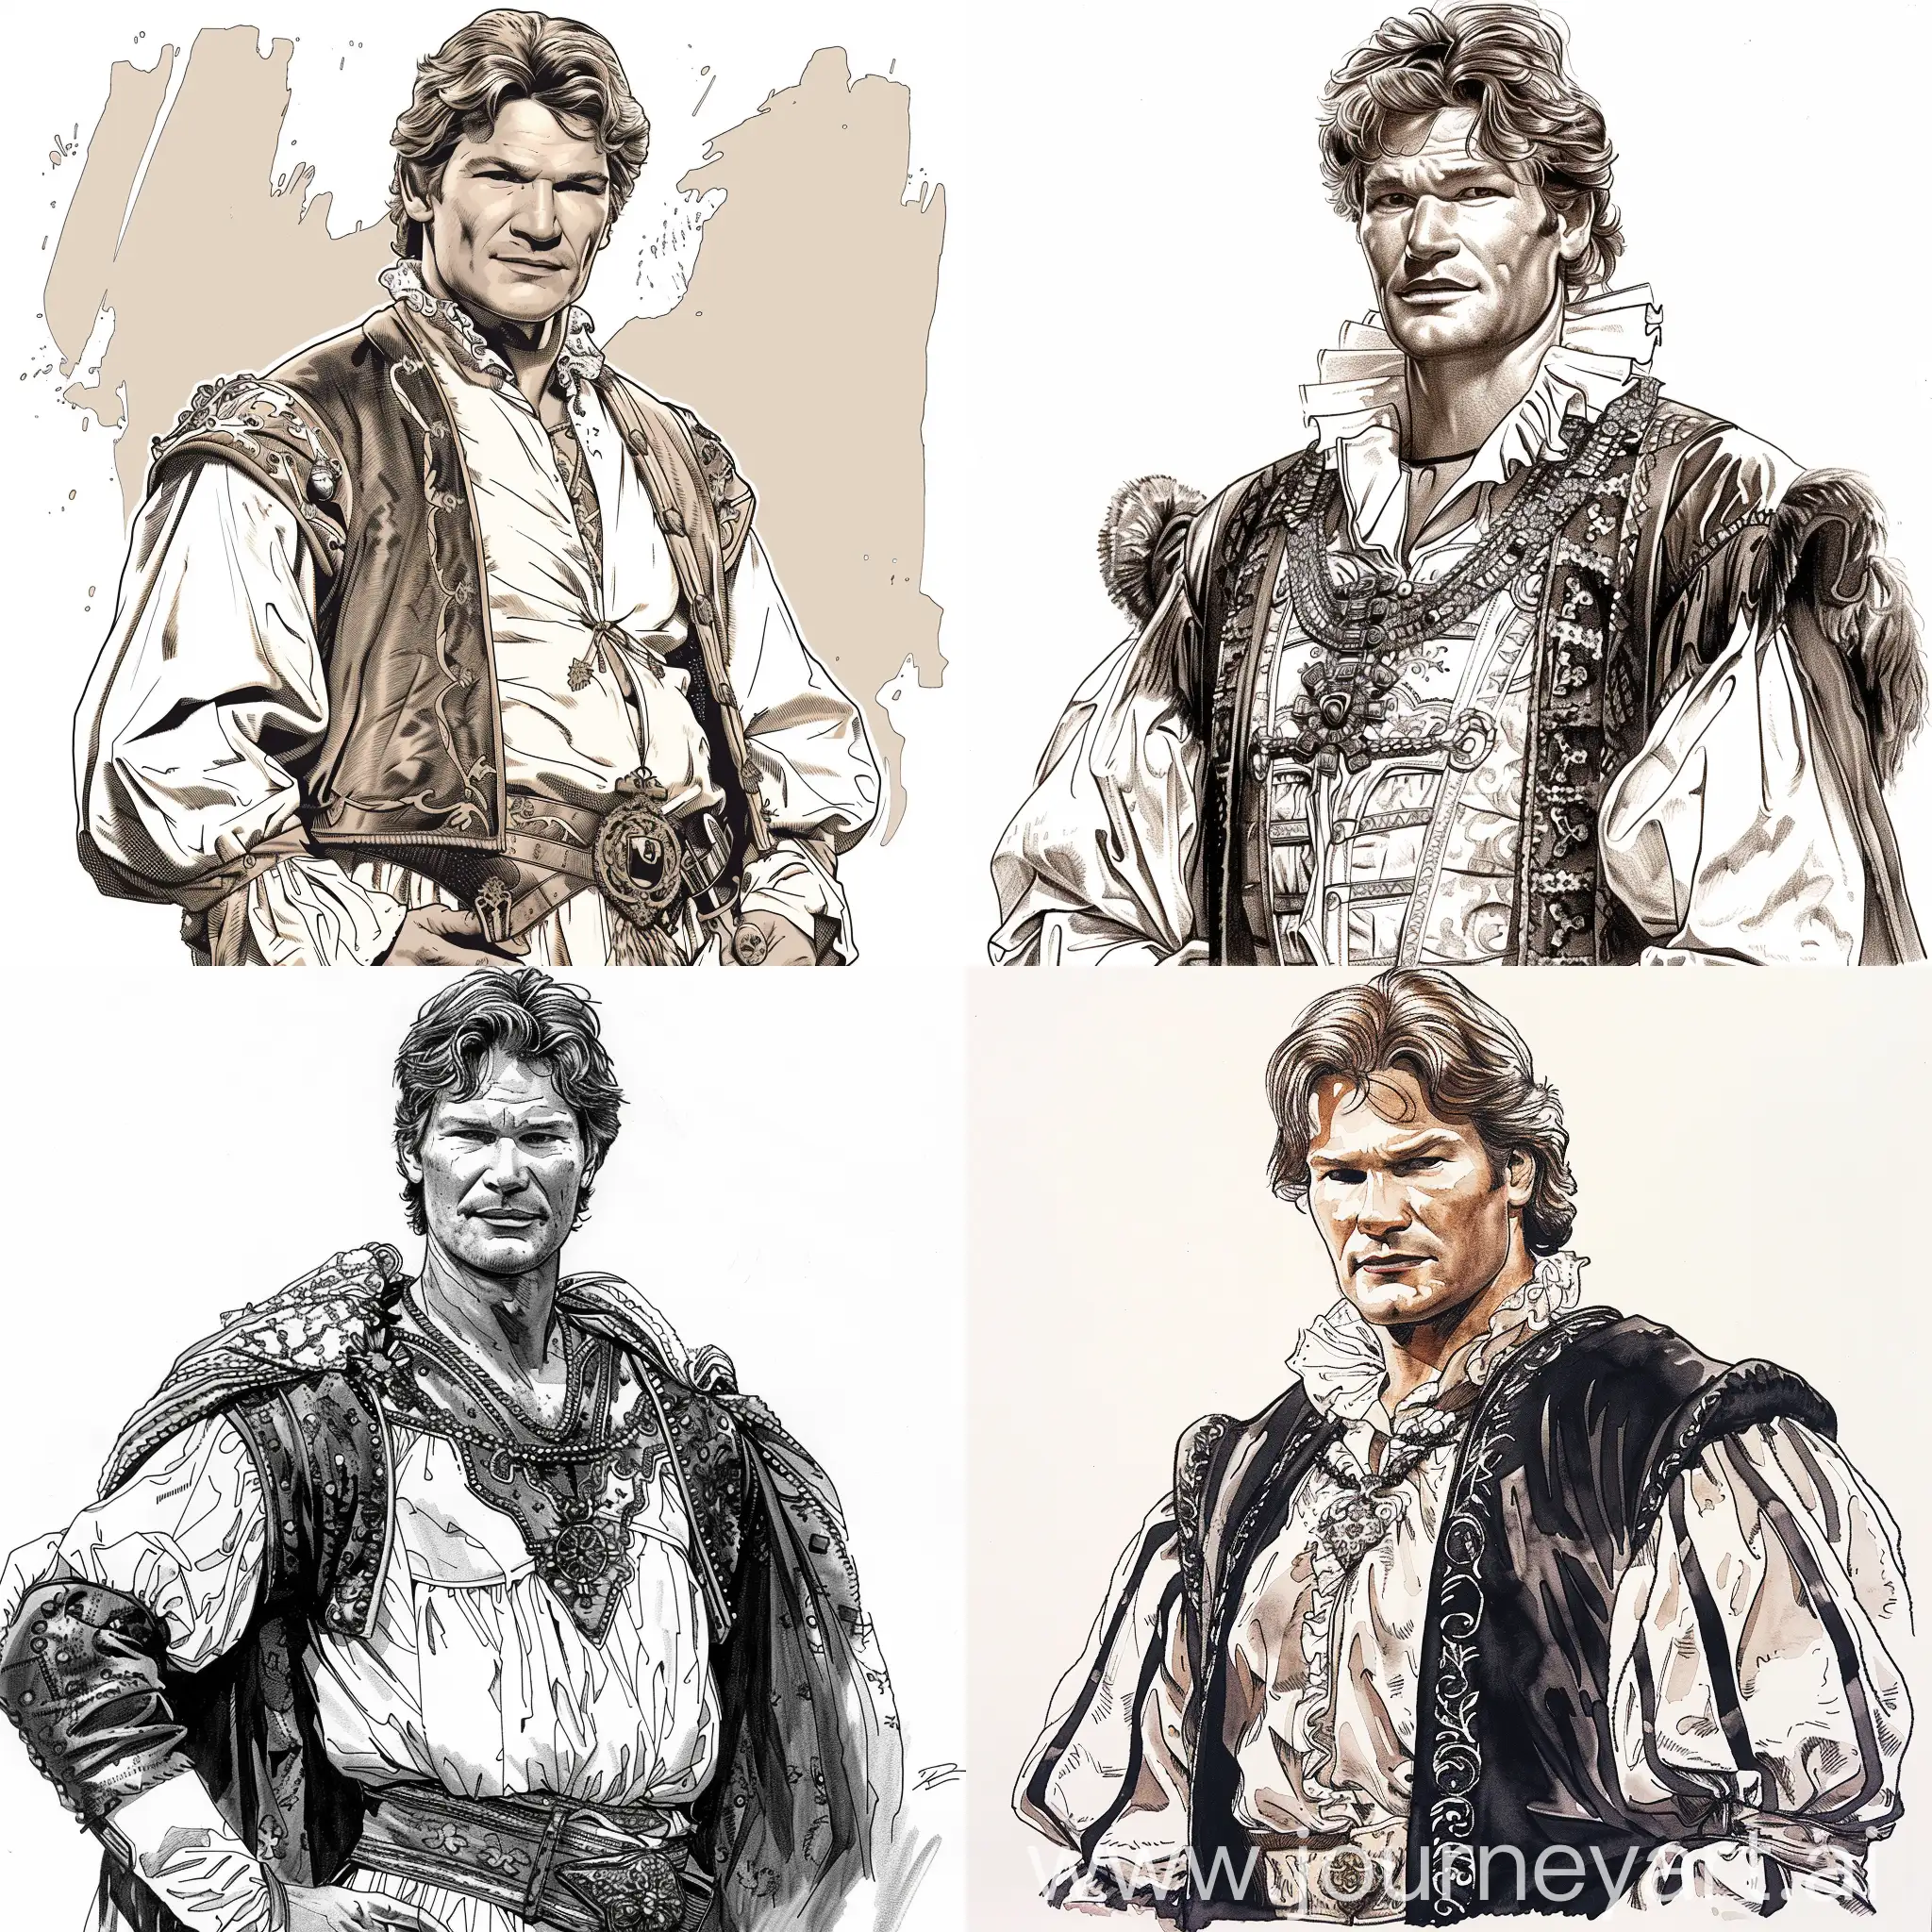 Actor Patrick Swayze, waist-high portrait, in the costume of the medieval king of Spain, in rich expensive royal clothes, with a lot of details, illustration style, with black ink stroke